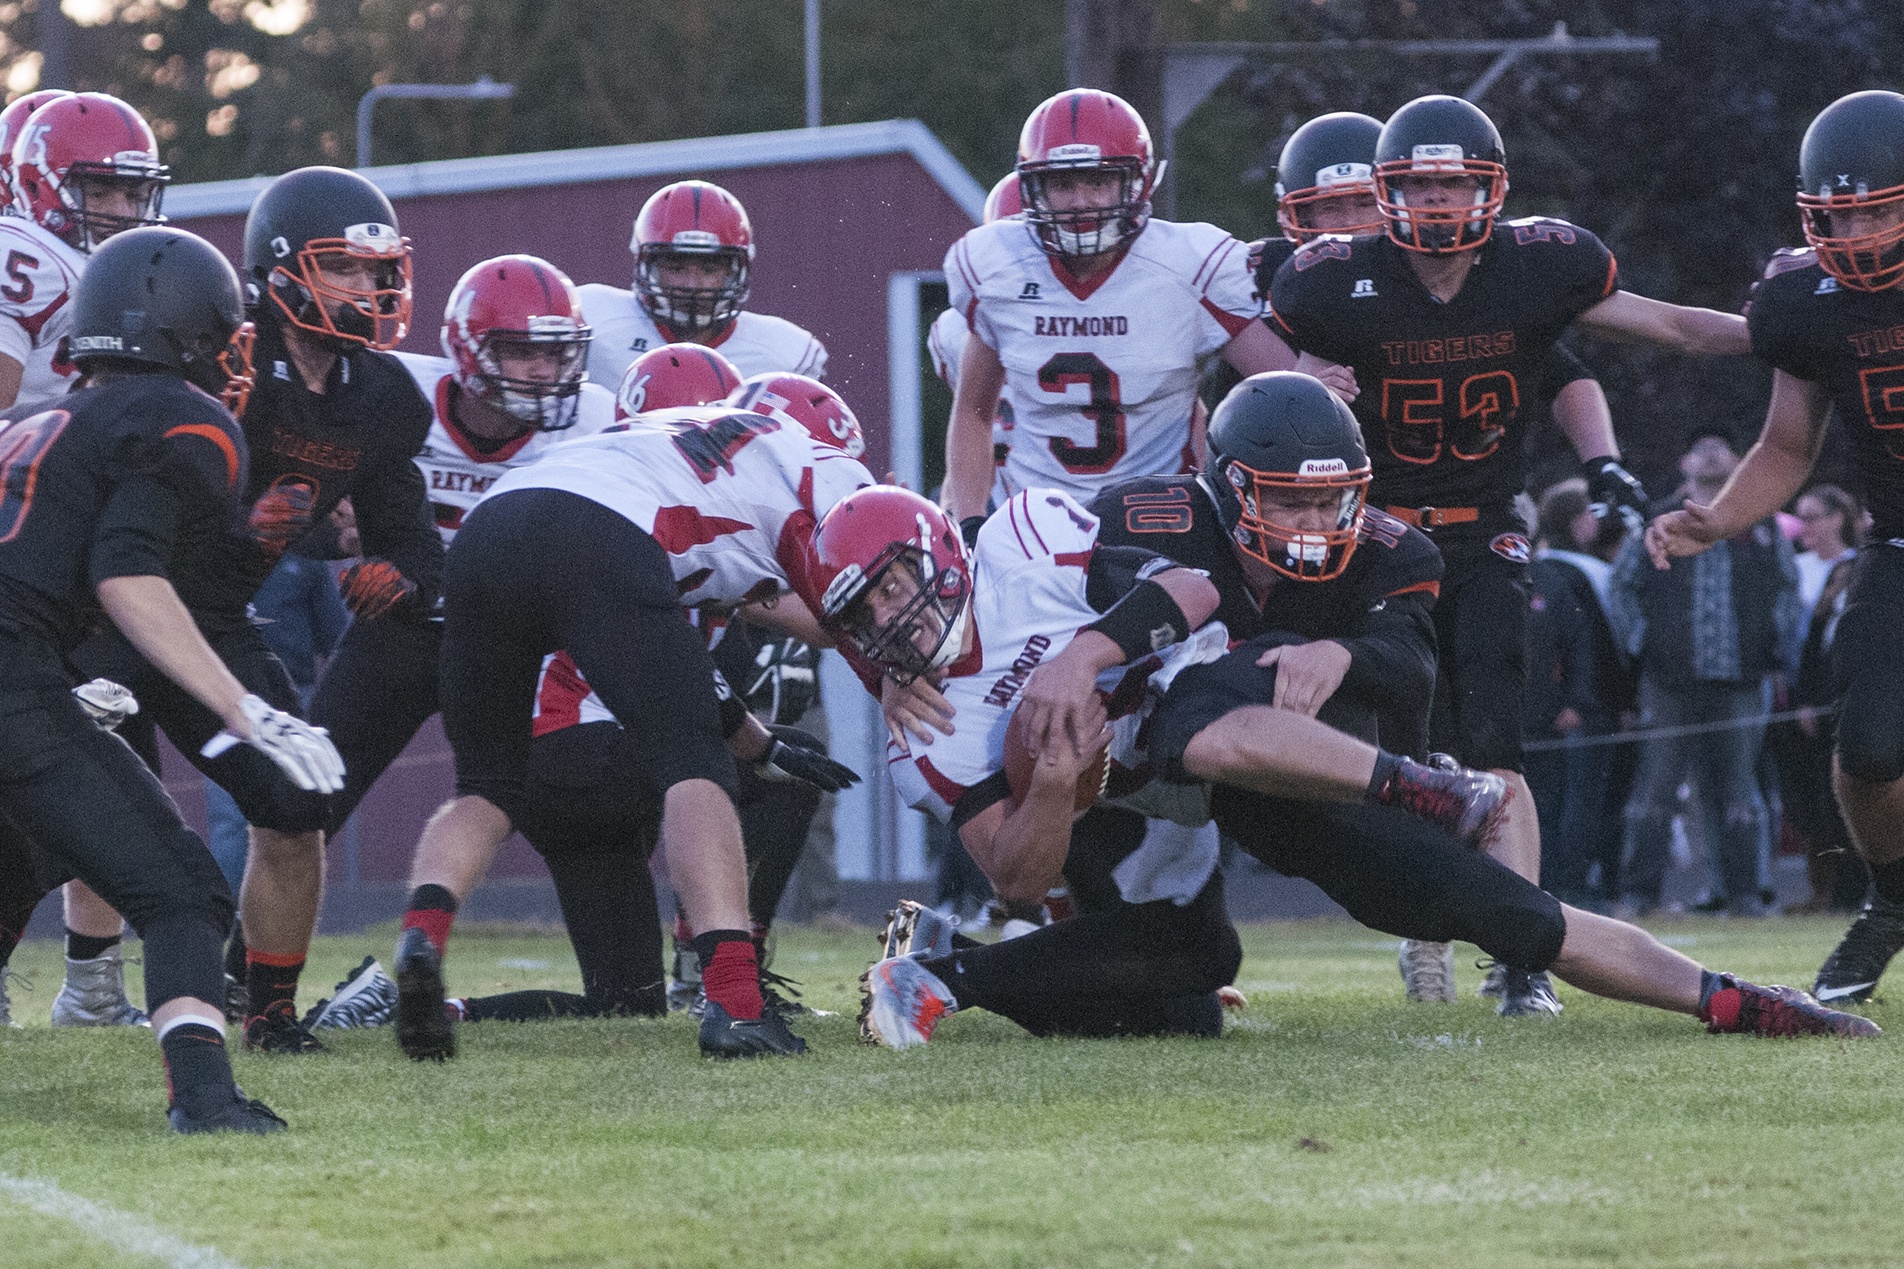 Napavine shows off its talent in 47-13 win over Raymond